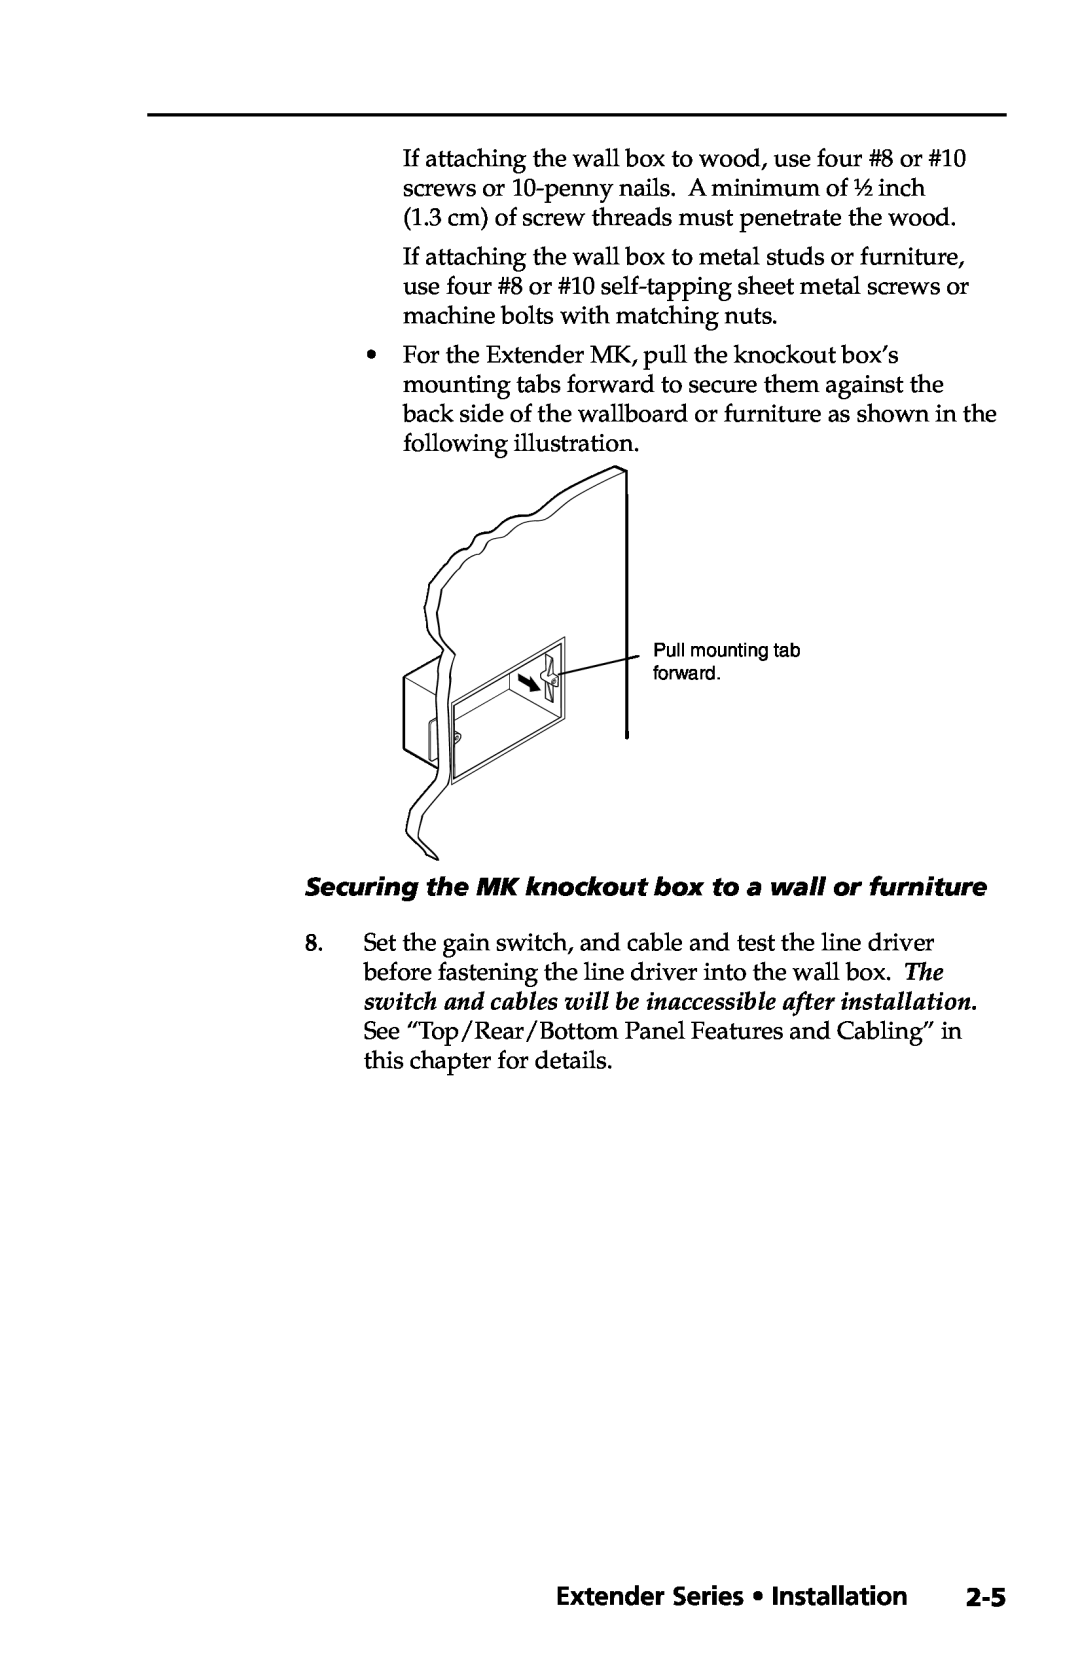 Extron electronic manual Preliminary, Extender Series Installation, Securing the MK knockout box to a wall or furniture 